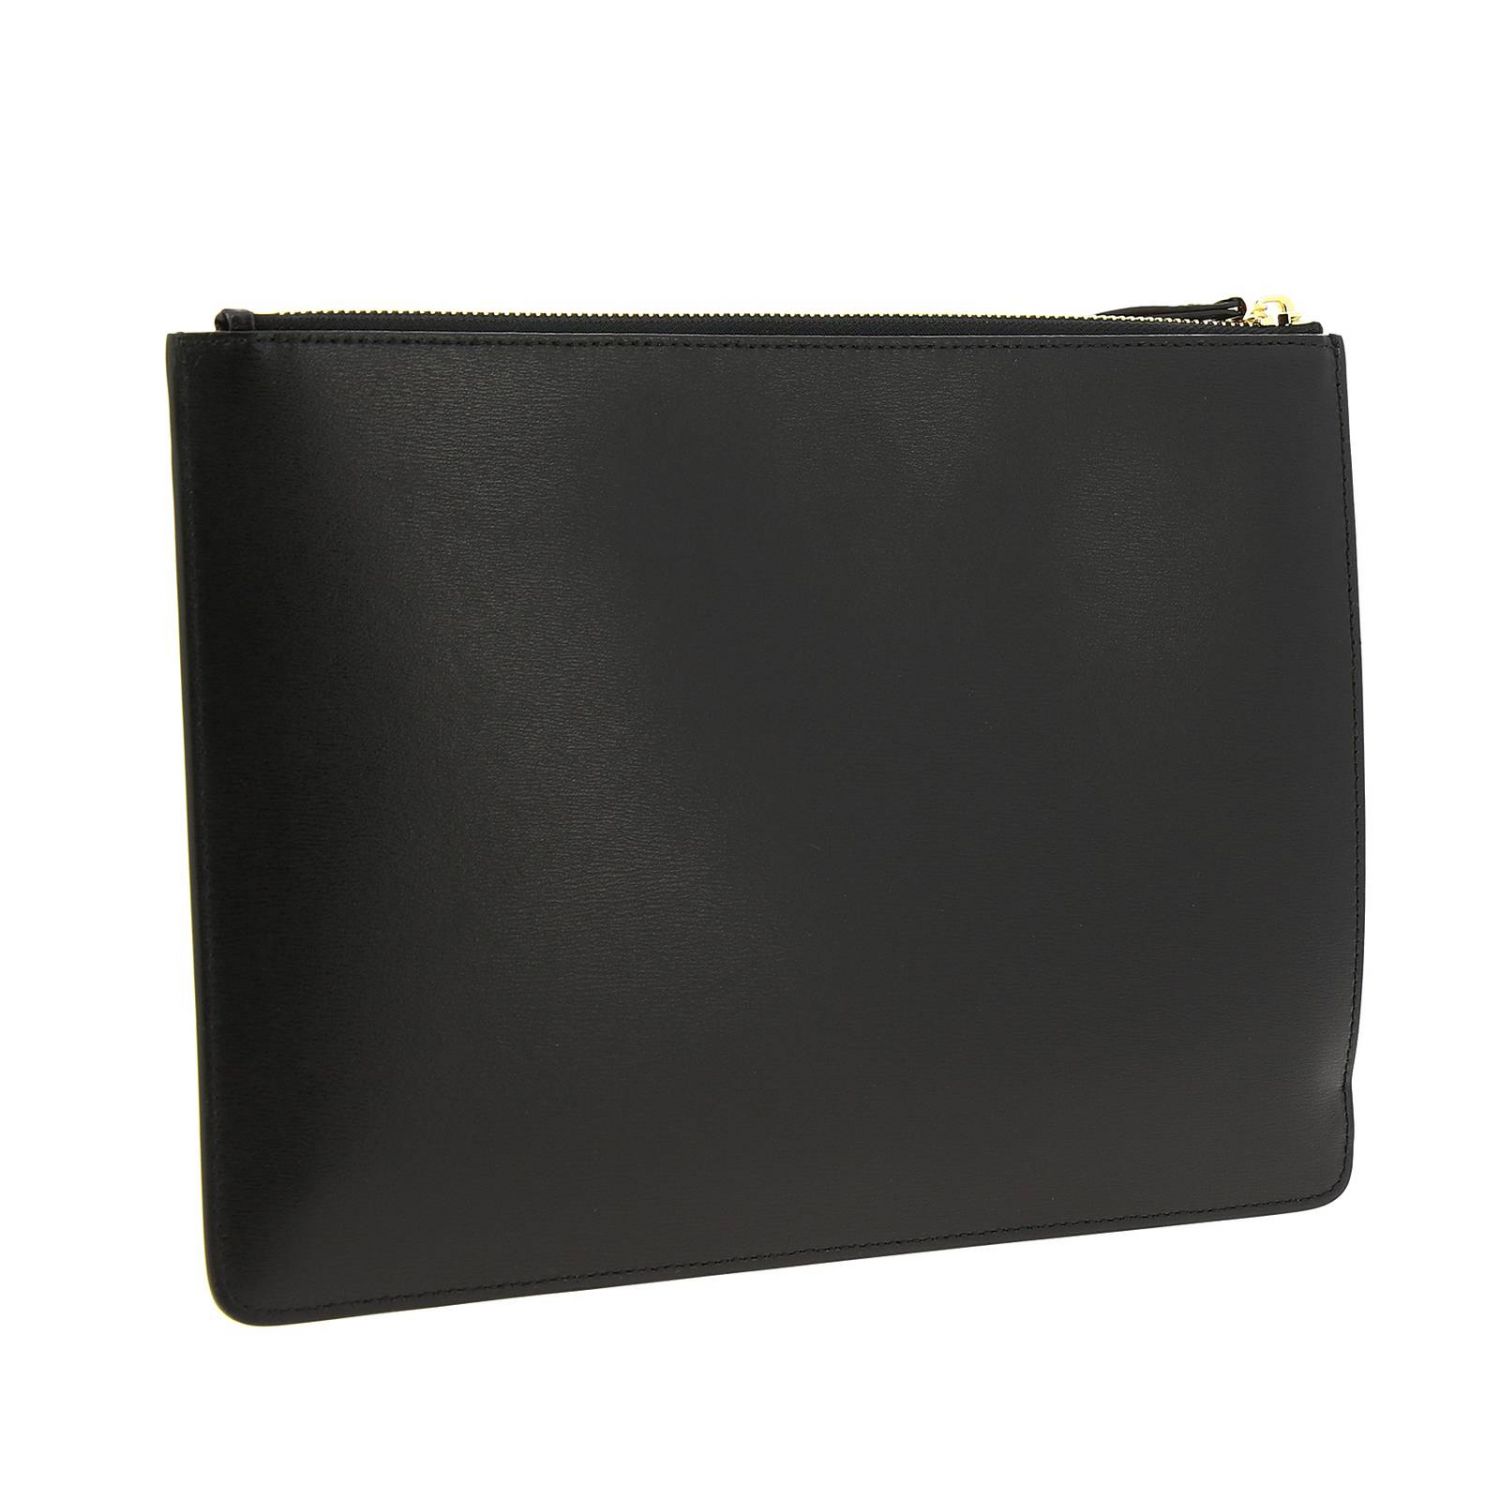 Salvatore Ferragamo Outlet: city hook large Clutch bag in textured ...